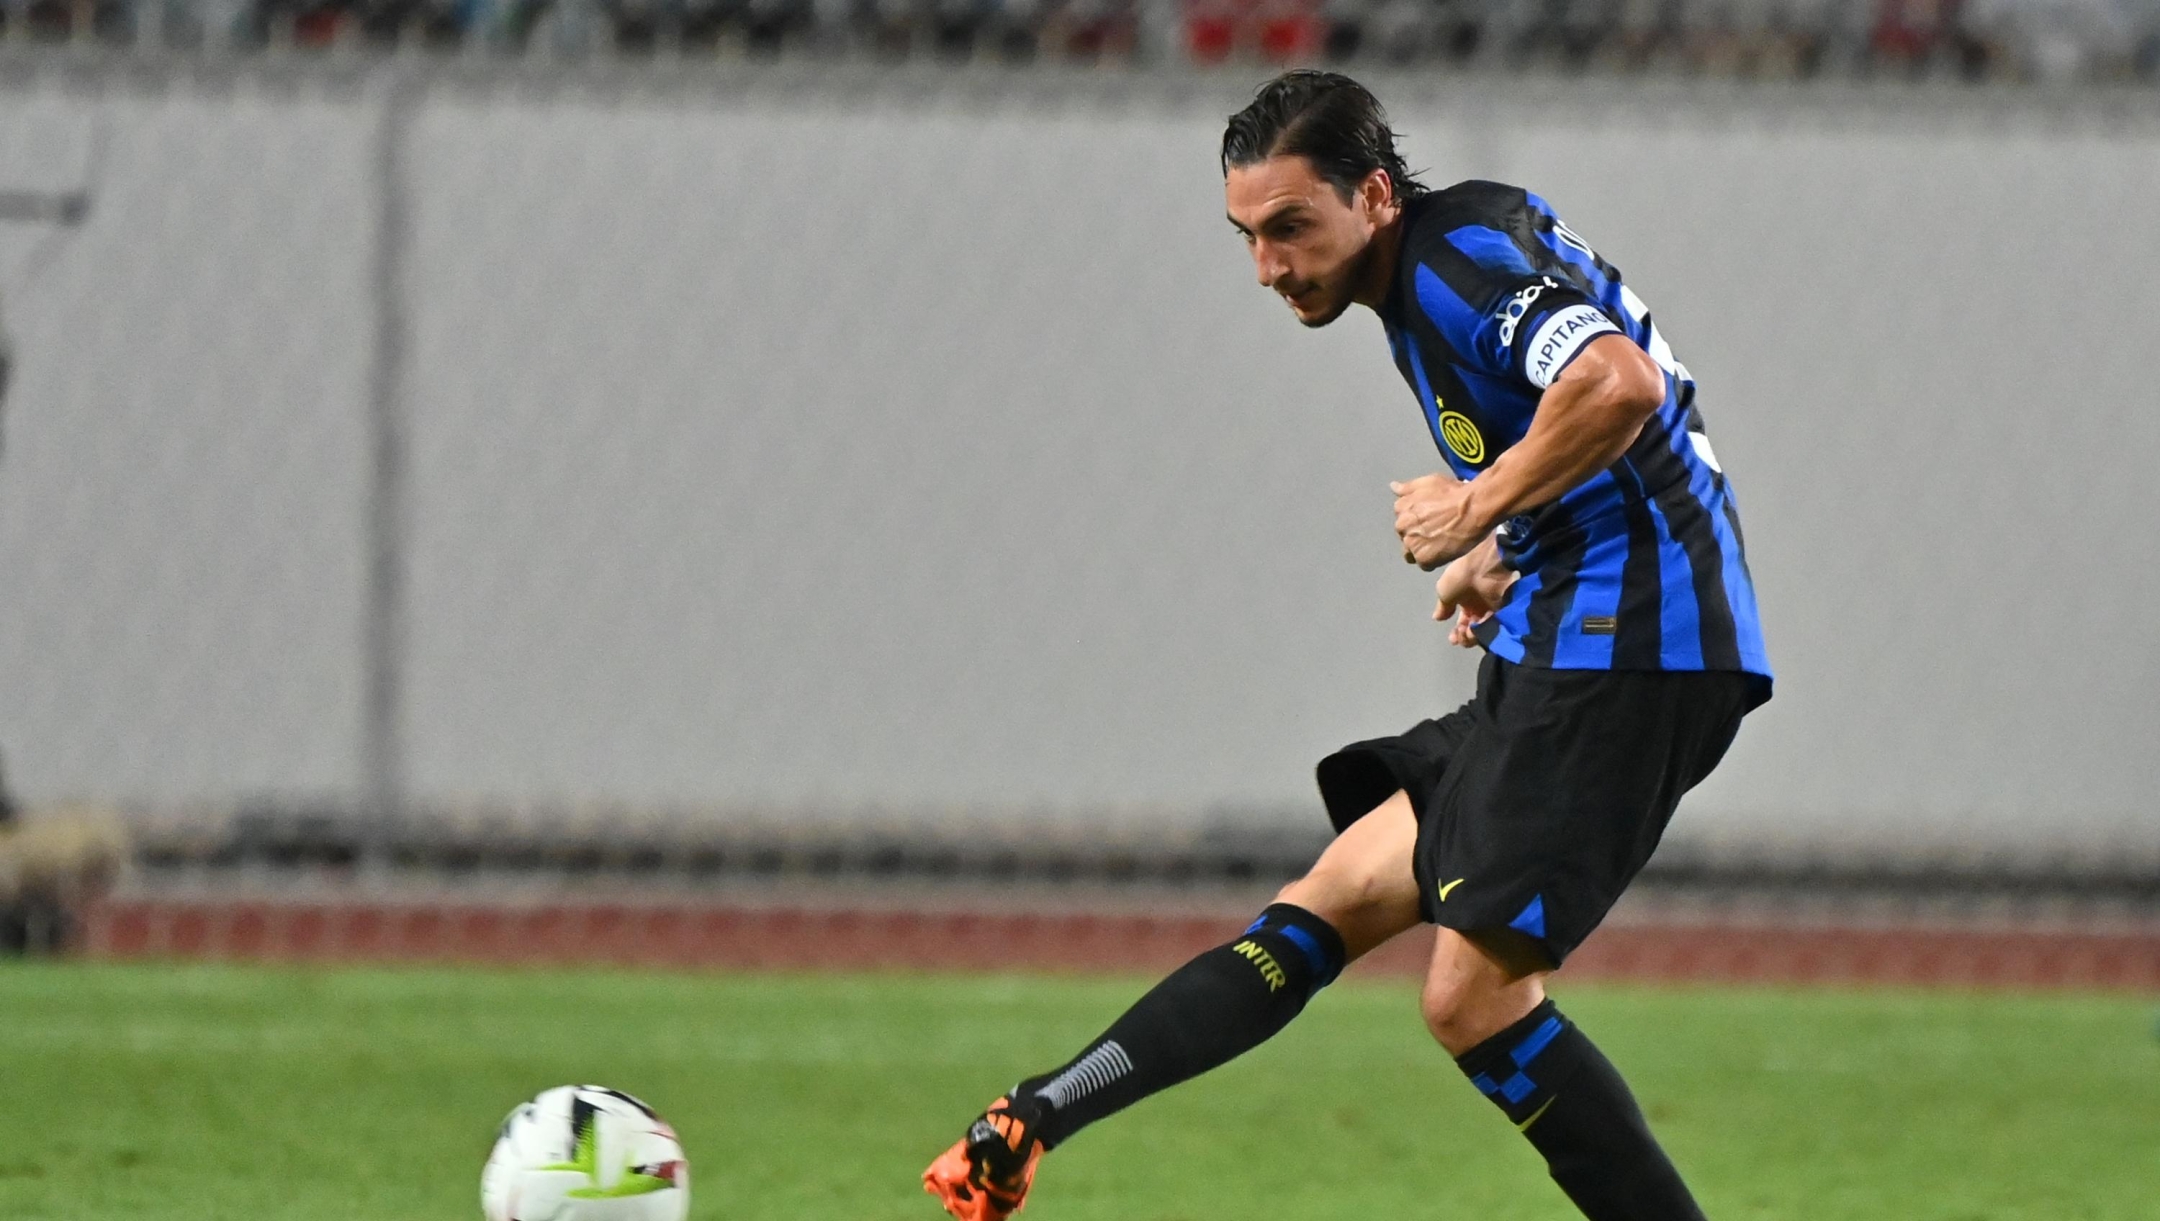 OSAKA, JAPAN - JULY 27: Matteo Darmian of FC Internazionale in action during the pre-season friendly match between FC Internazionale and Al-Nassr at Yanmar Stadium Nagai on July 27, 2023 in Osaka, Japan. (Photo by Kenta Harada/Getty Images)